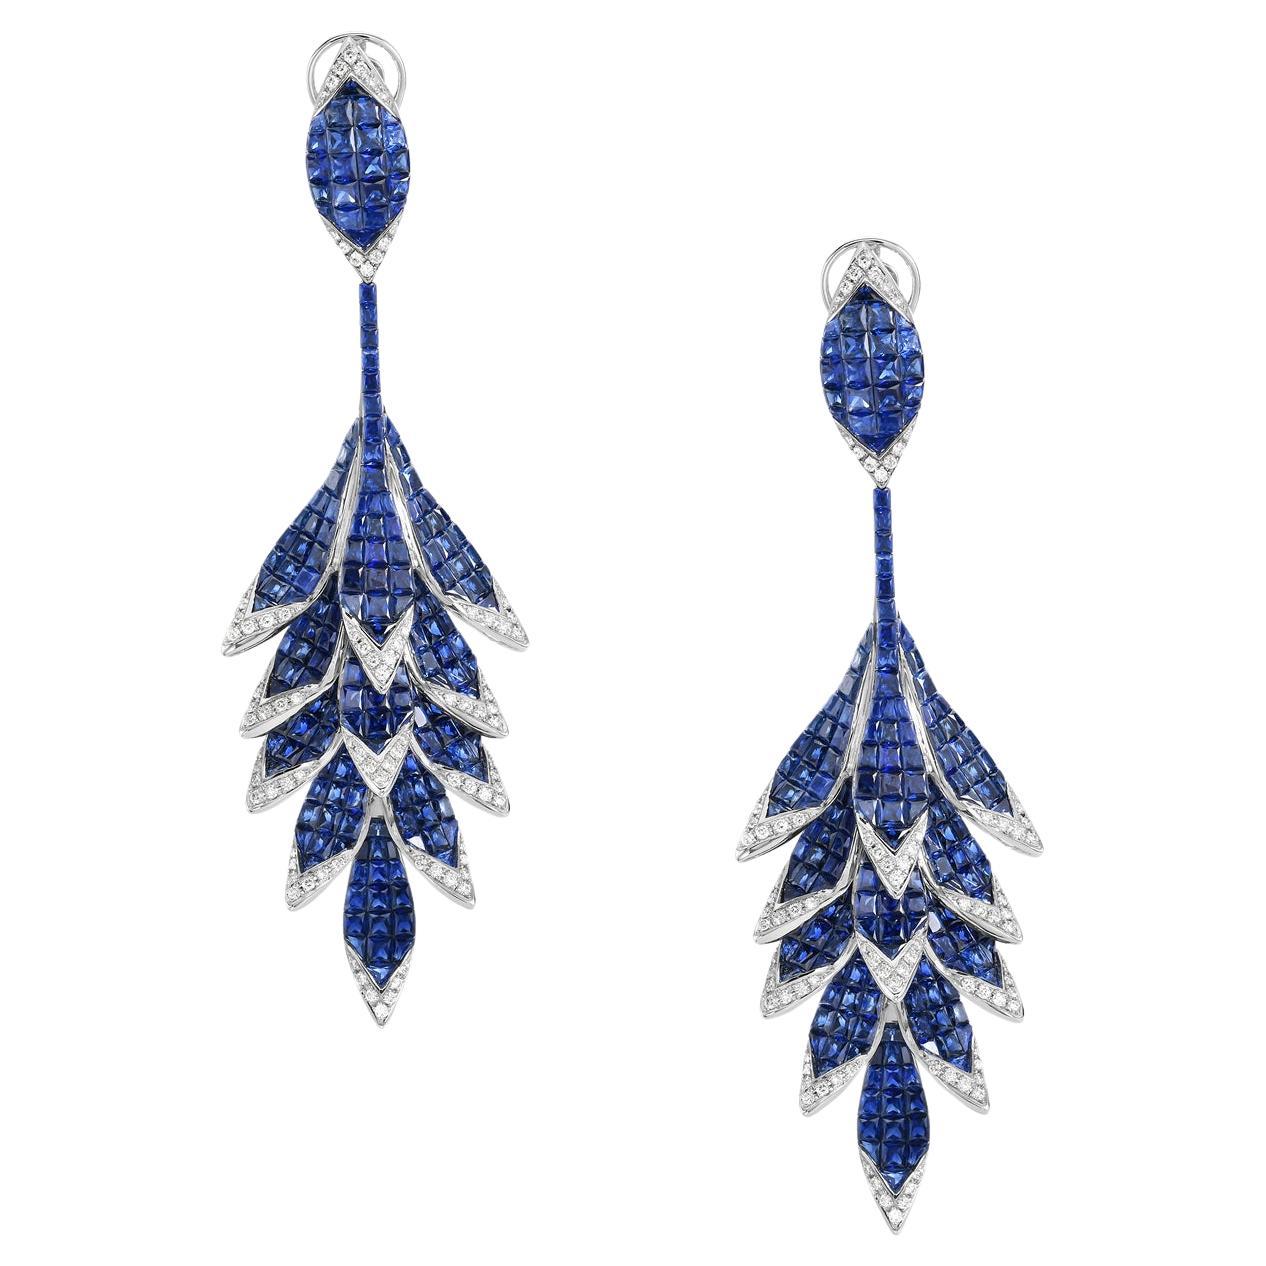 36.52 ct Blue Sapphire Studded Dangle Earrings Made In 18k Gold With Diamonds For Sale